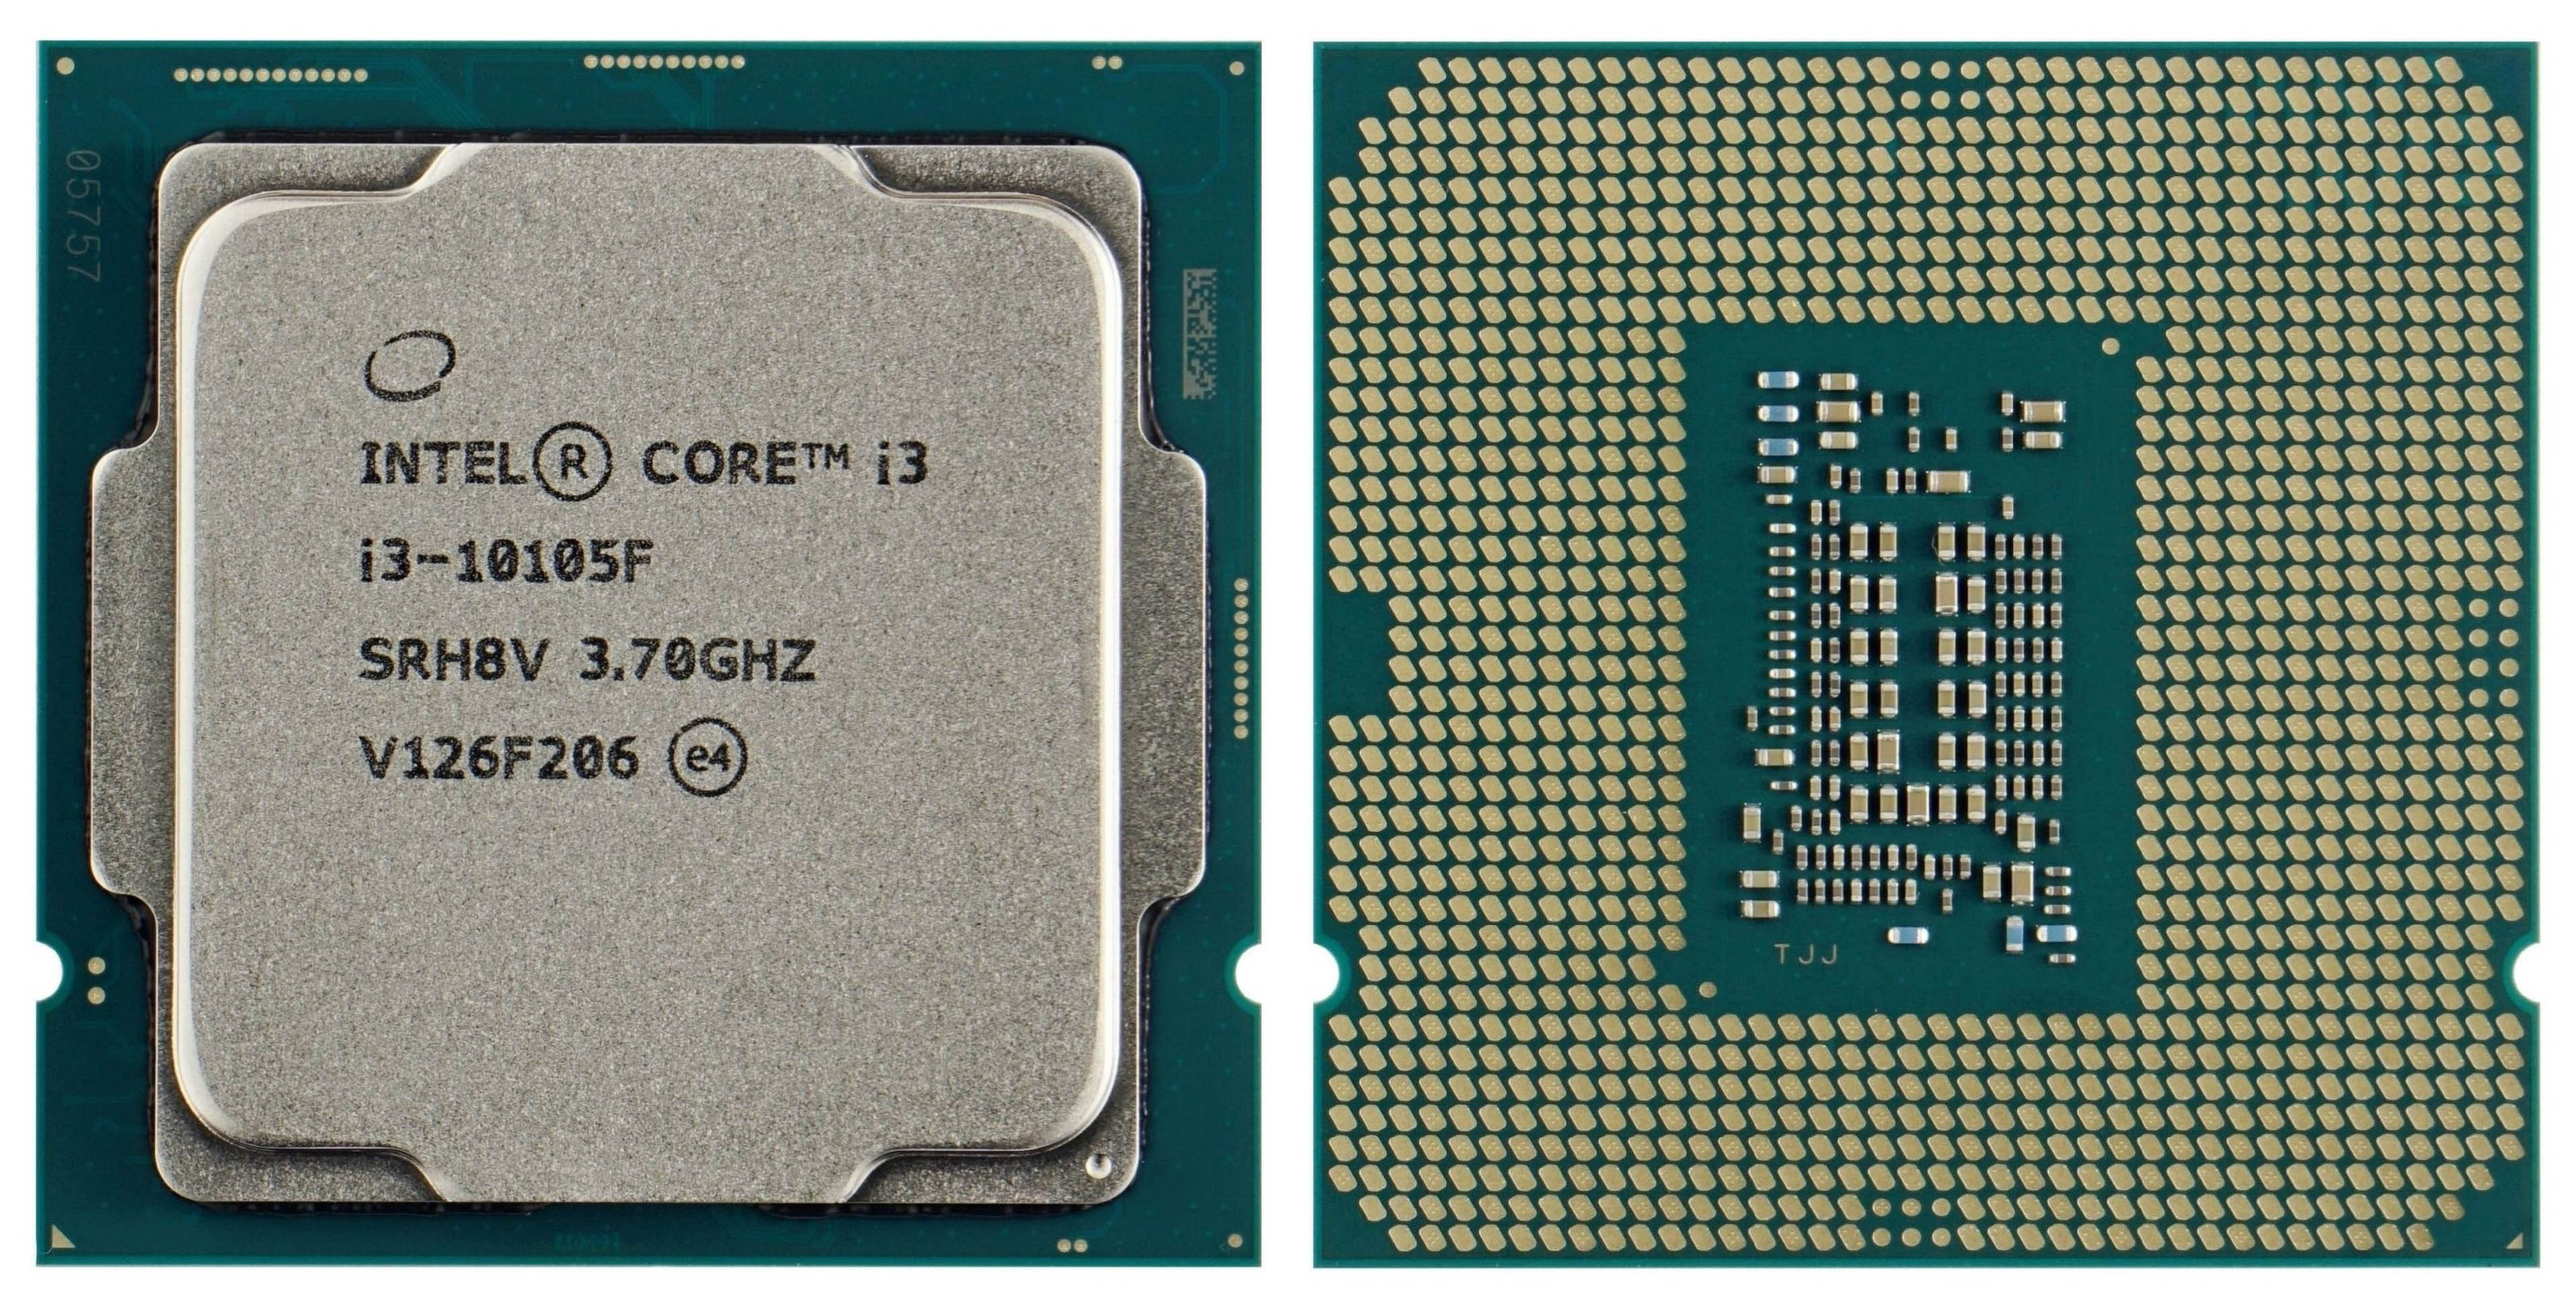 prieel maagd Vernederen Intel Core i3-10105F is a rarity: Cheap processor for cheap mobos -  HWCooling.net